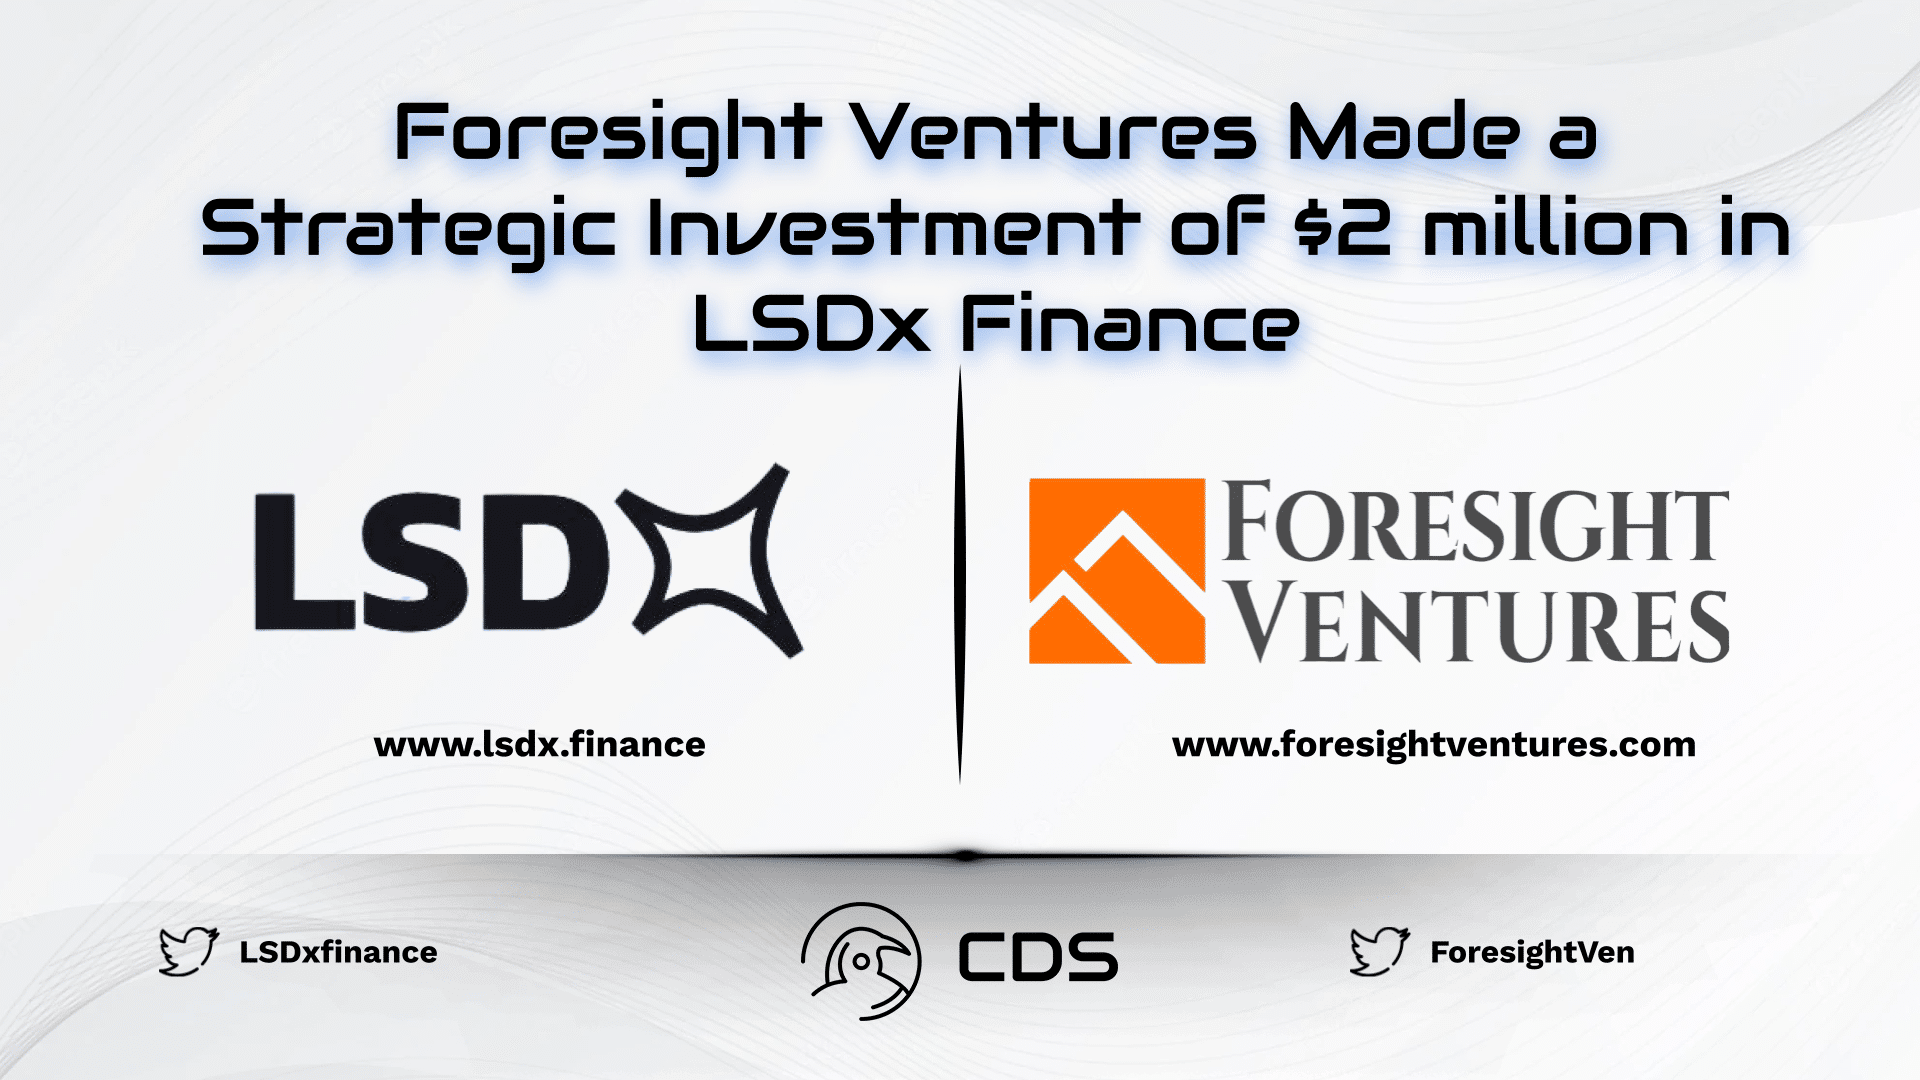 Foresight Ventures Made a Strategic Investment of $2 million in LSDx Finance